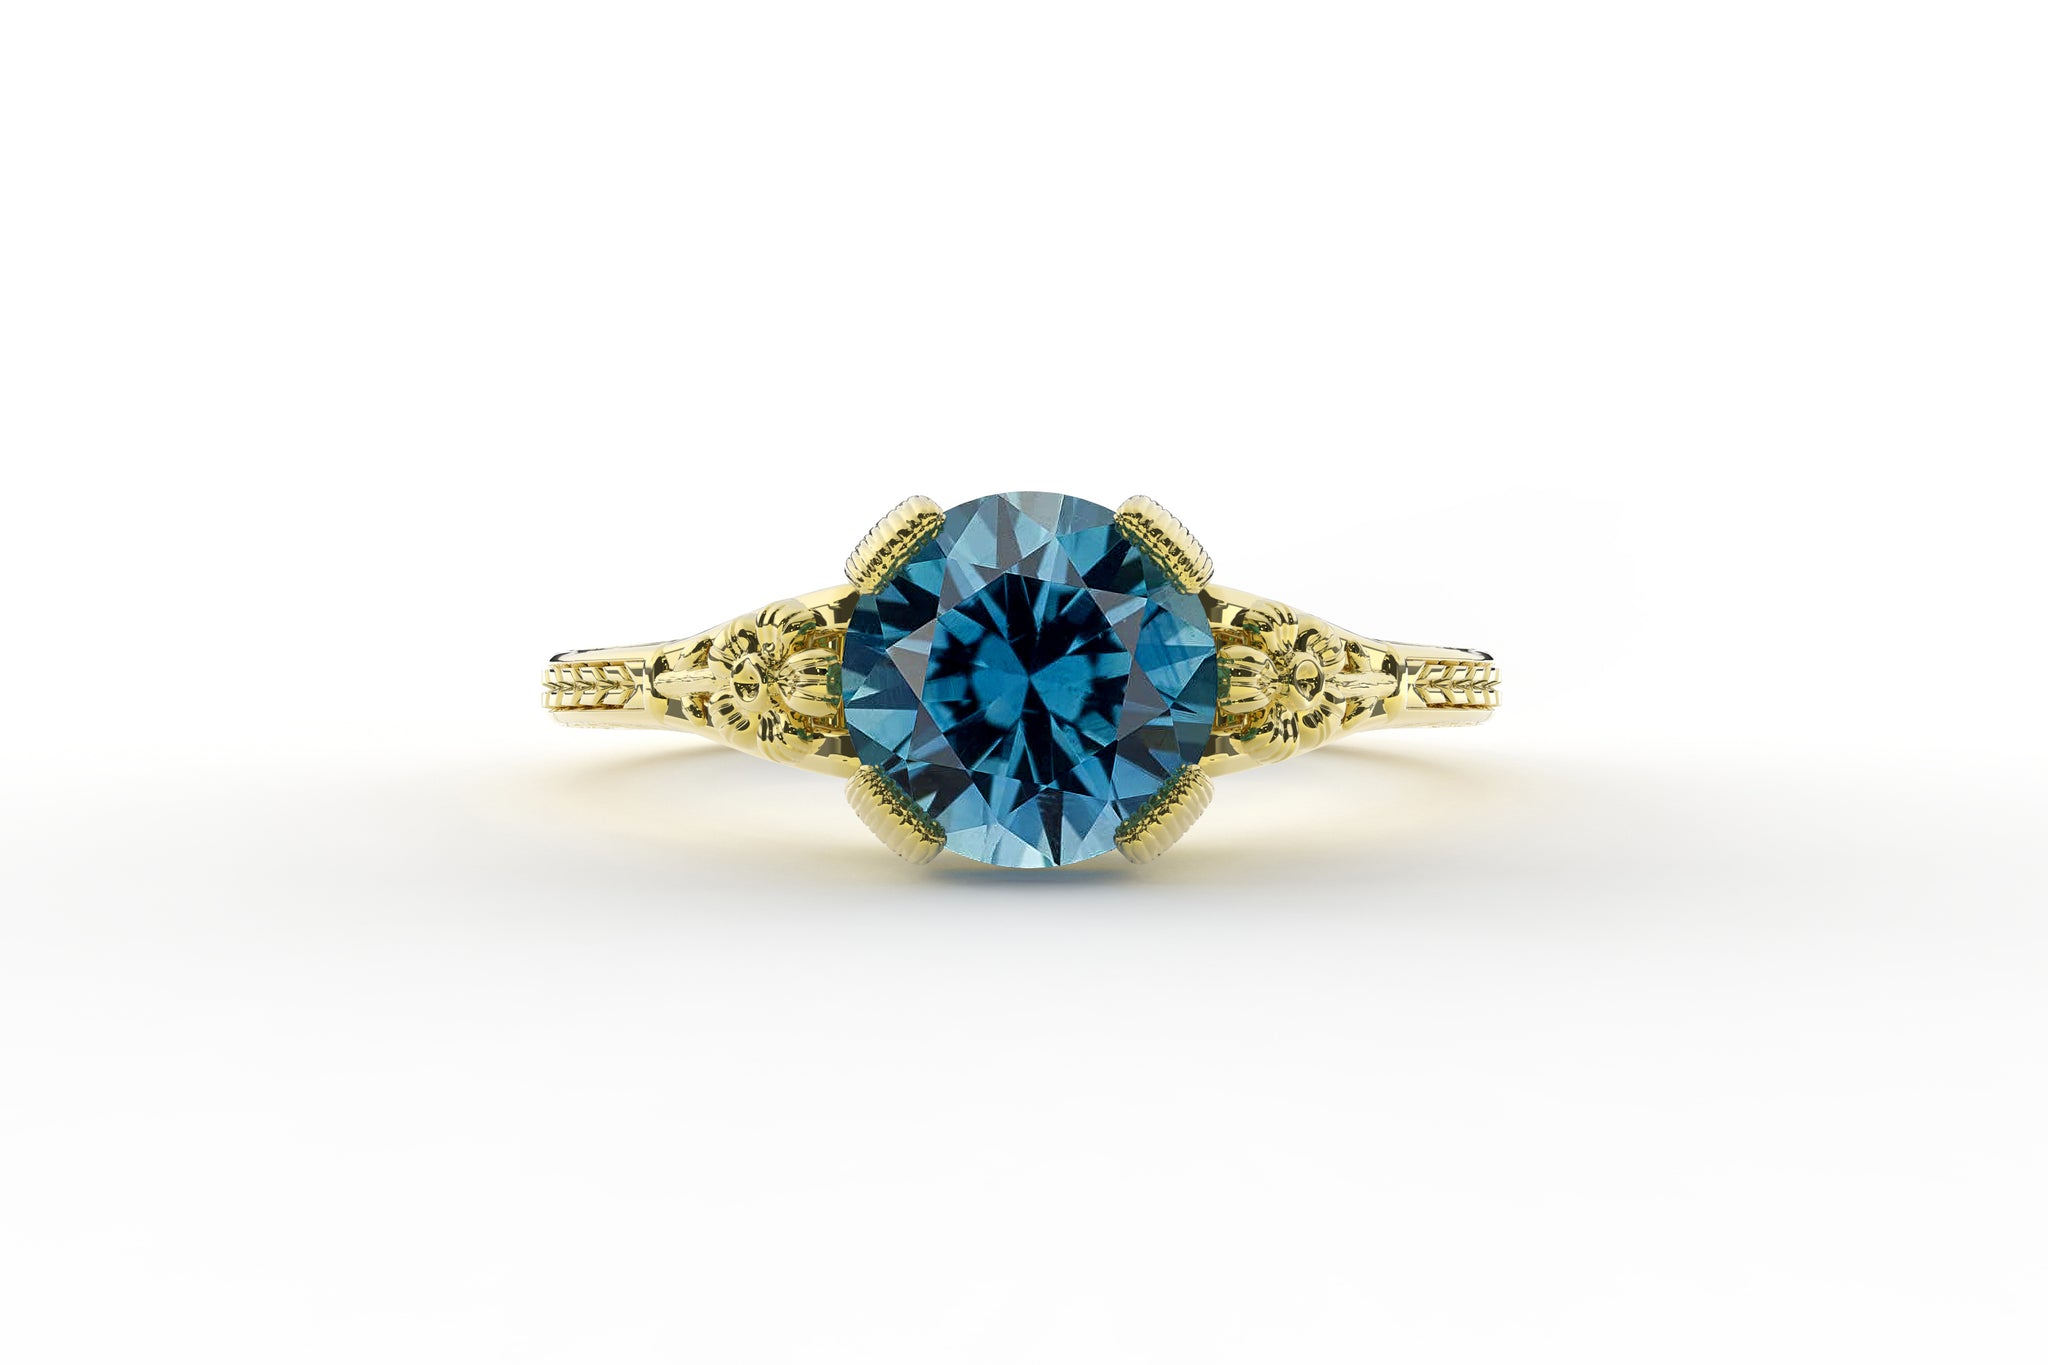 Montana Sapphire Art Deco Solitaire Blossom Ring - S. Kind & Co